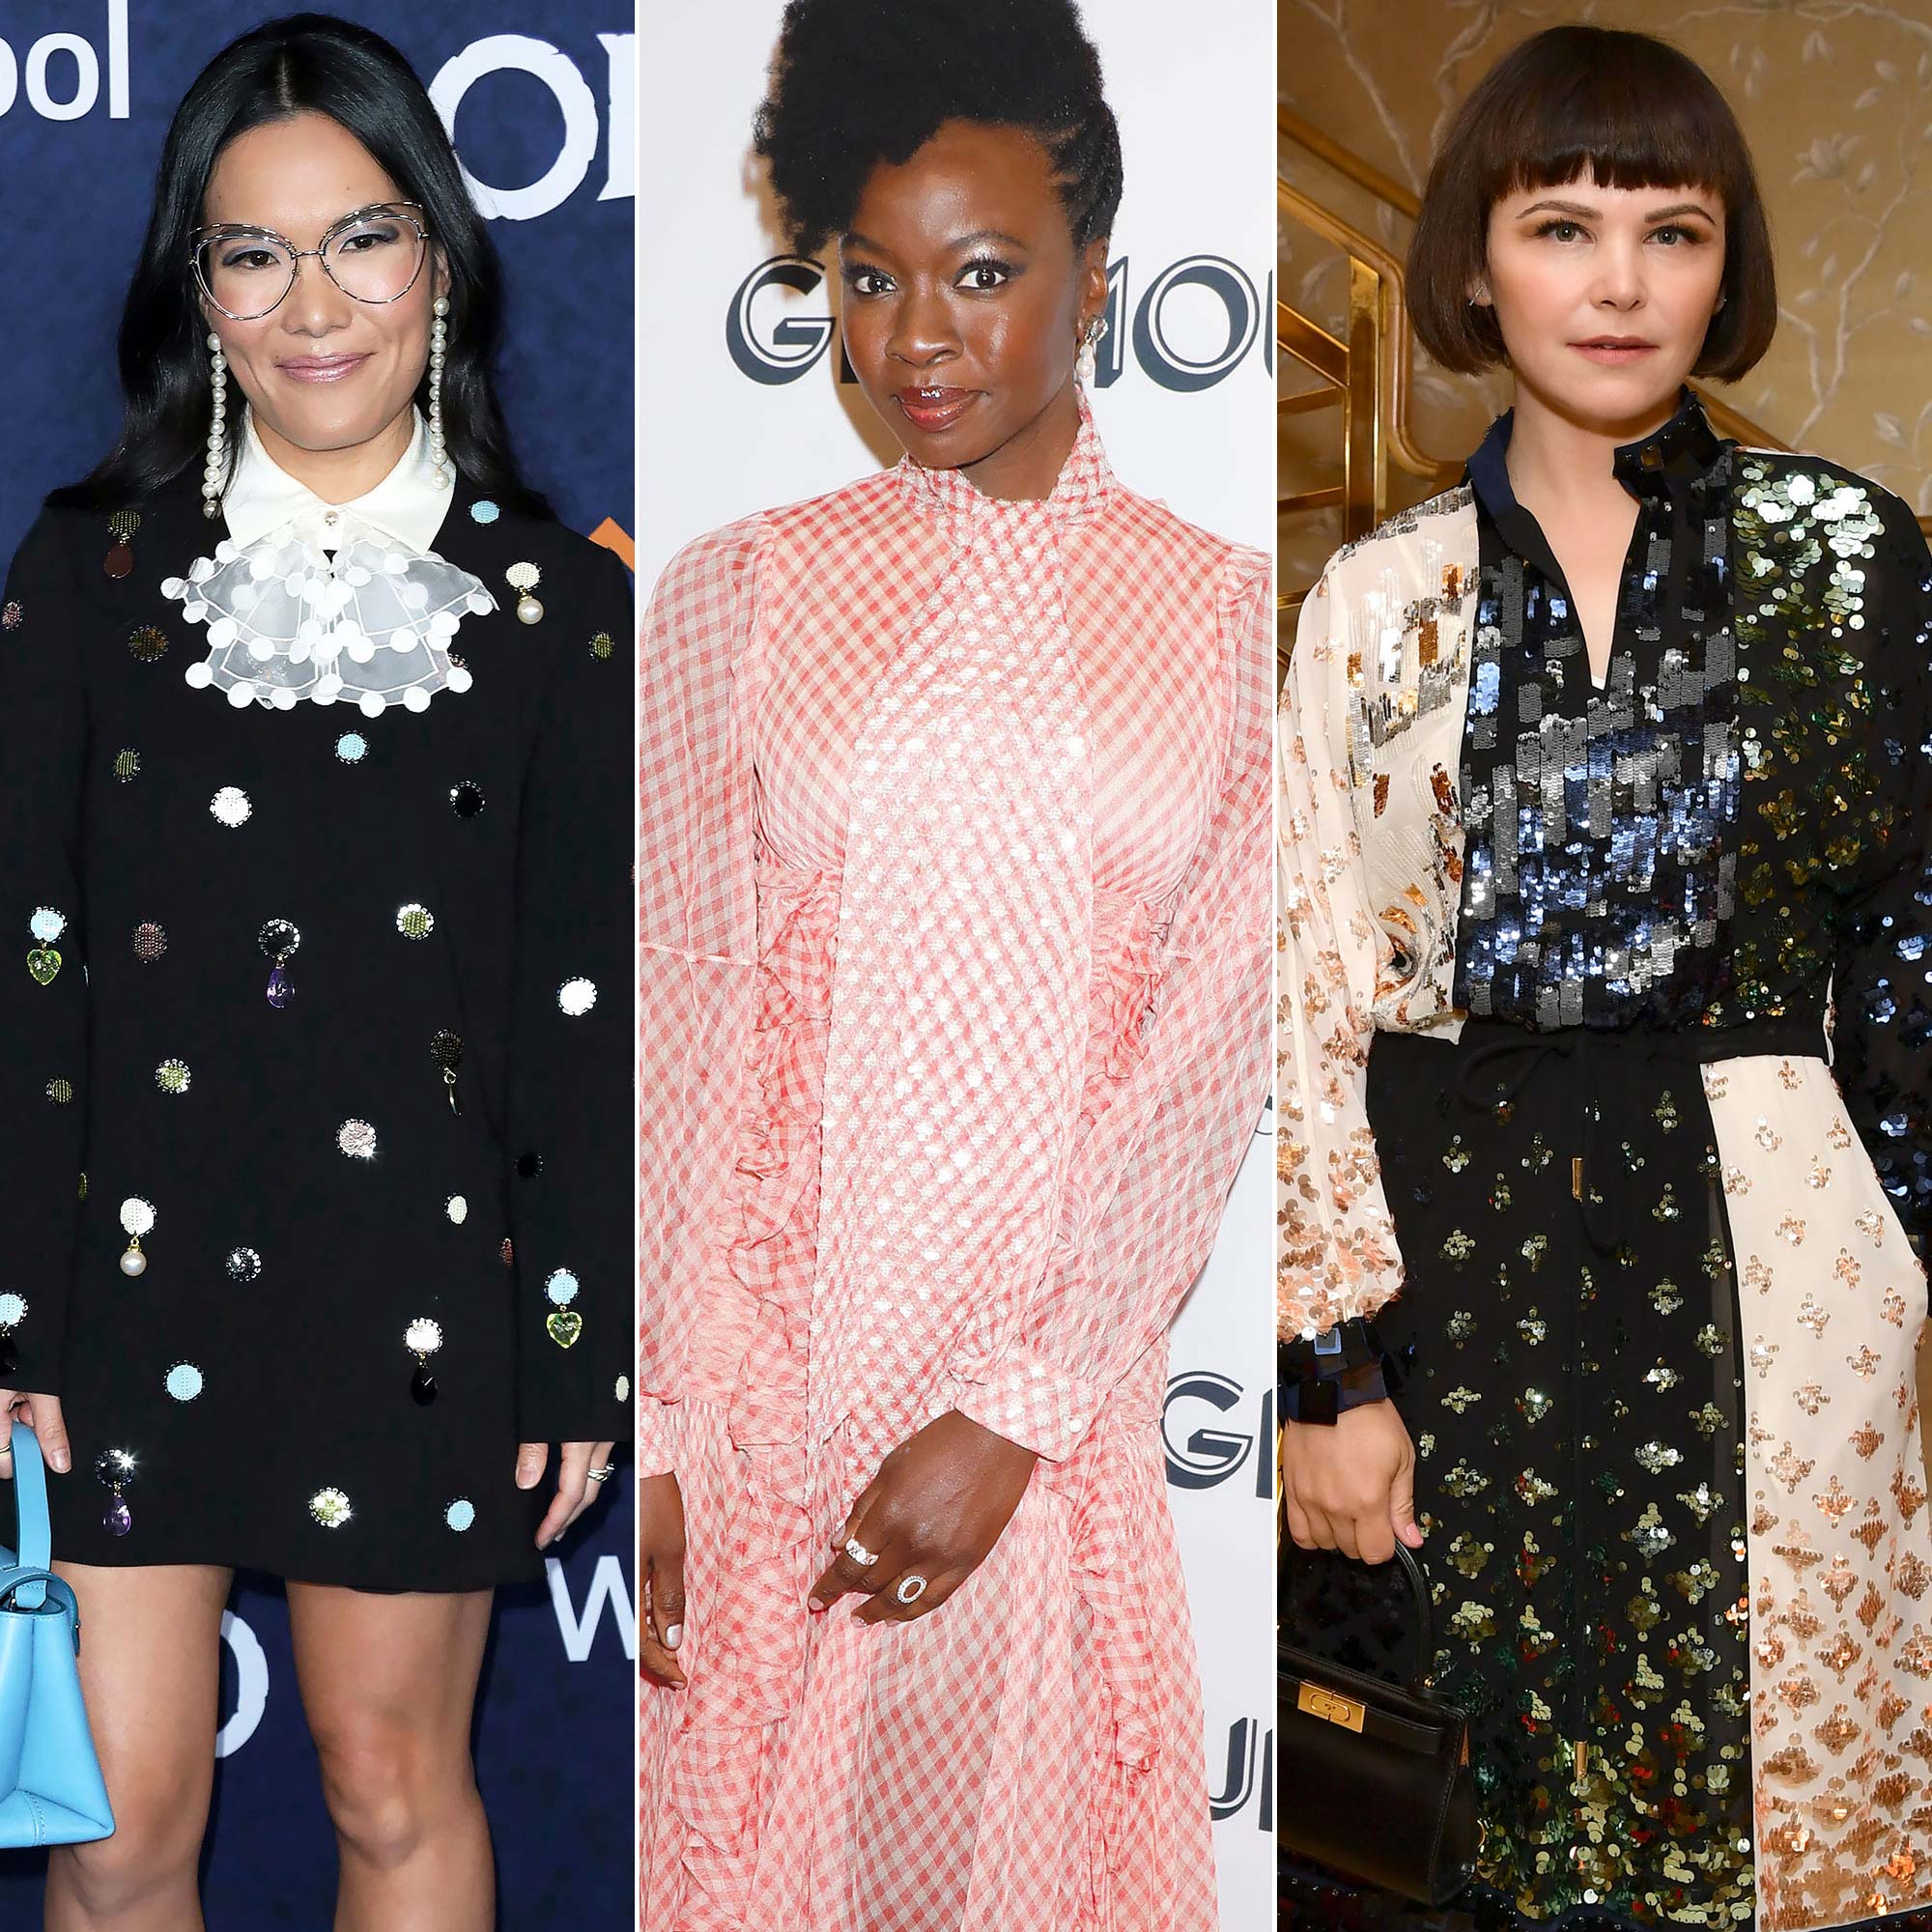 Celebs in Tory Burch: Mindy Kaling, Emily Blunt, More